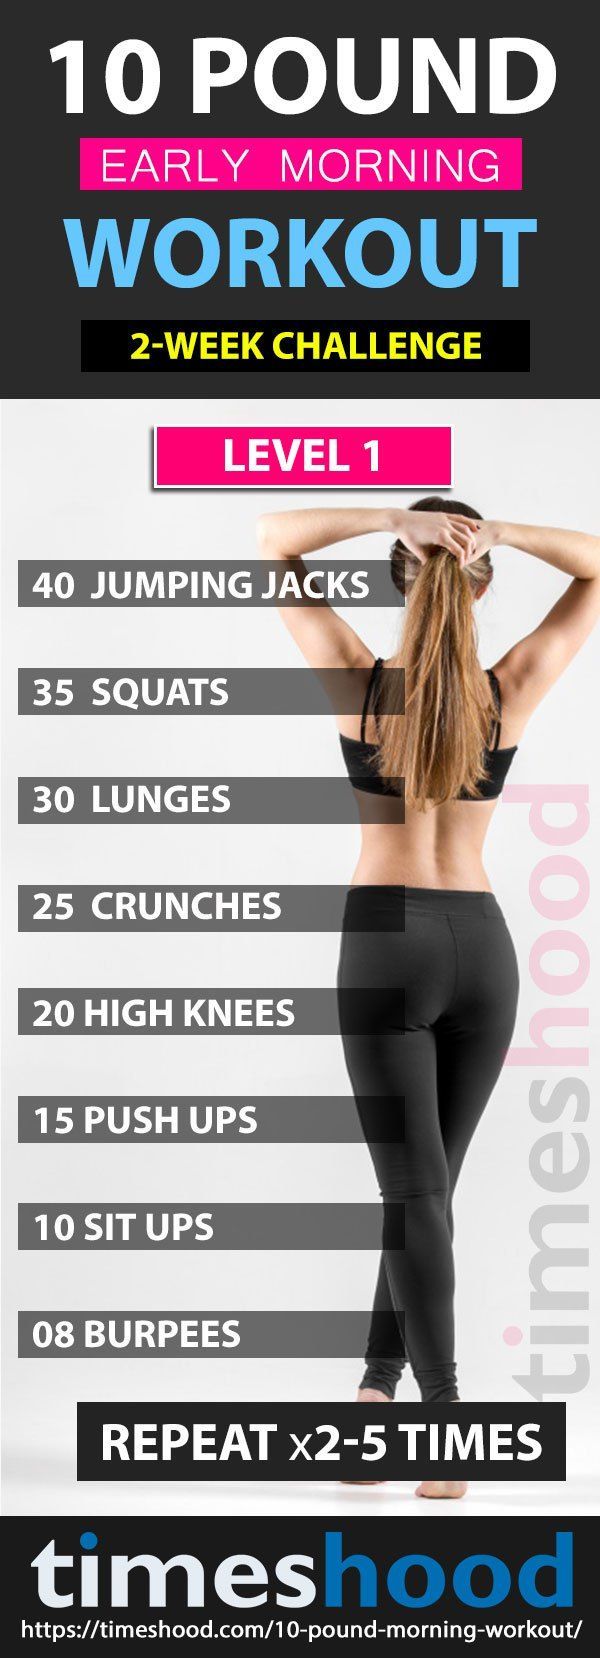 Lose Upto 10-Pound With This Early Morning Workout -   8 fitness At Home 10 pounds ideas